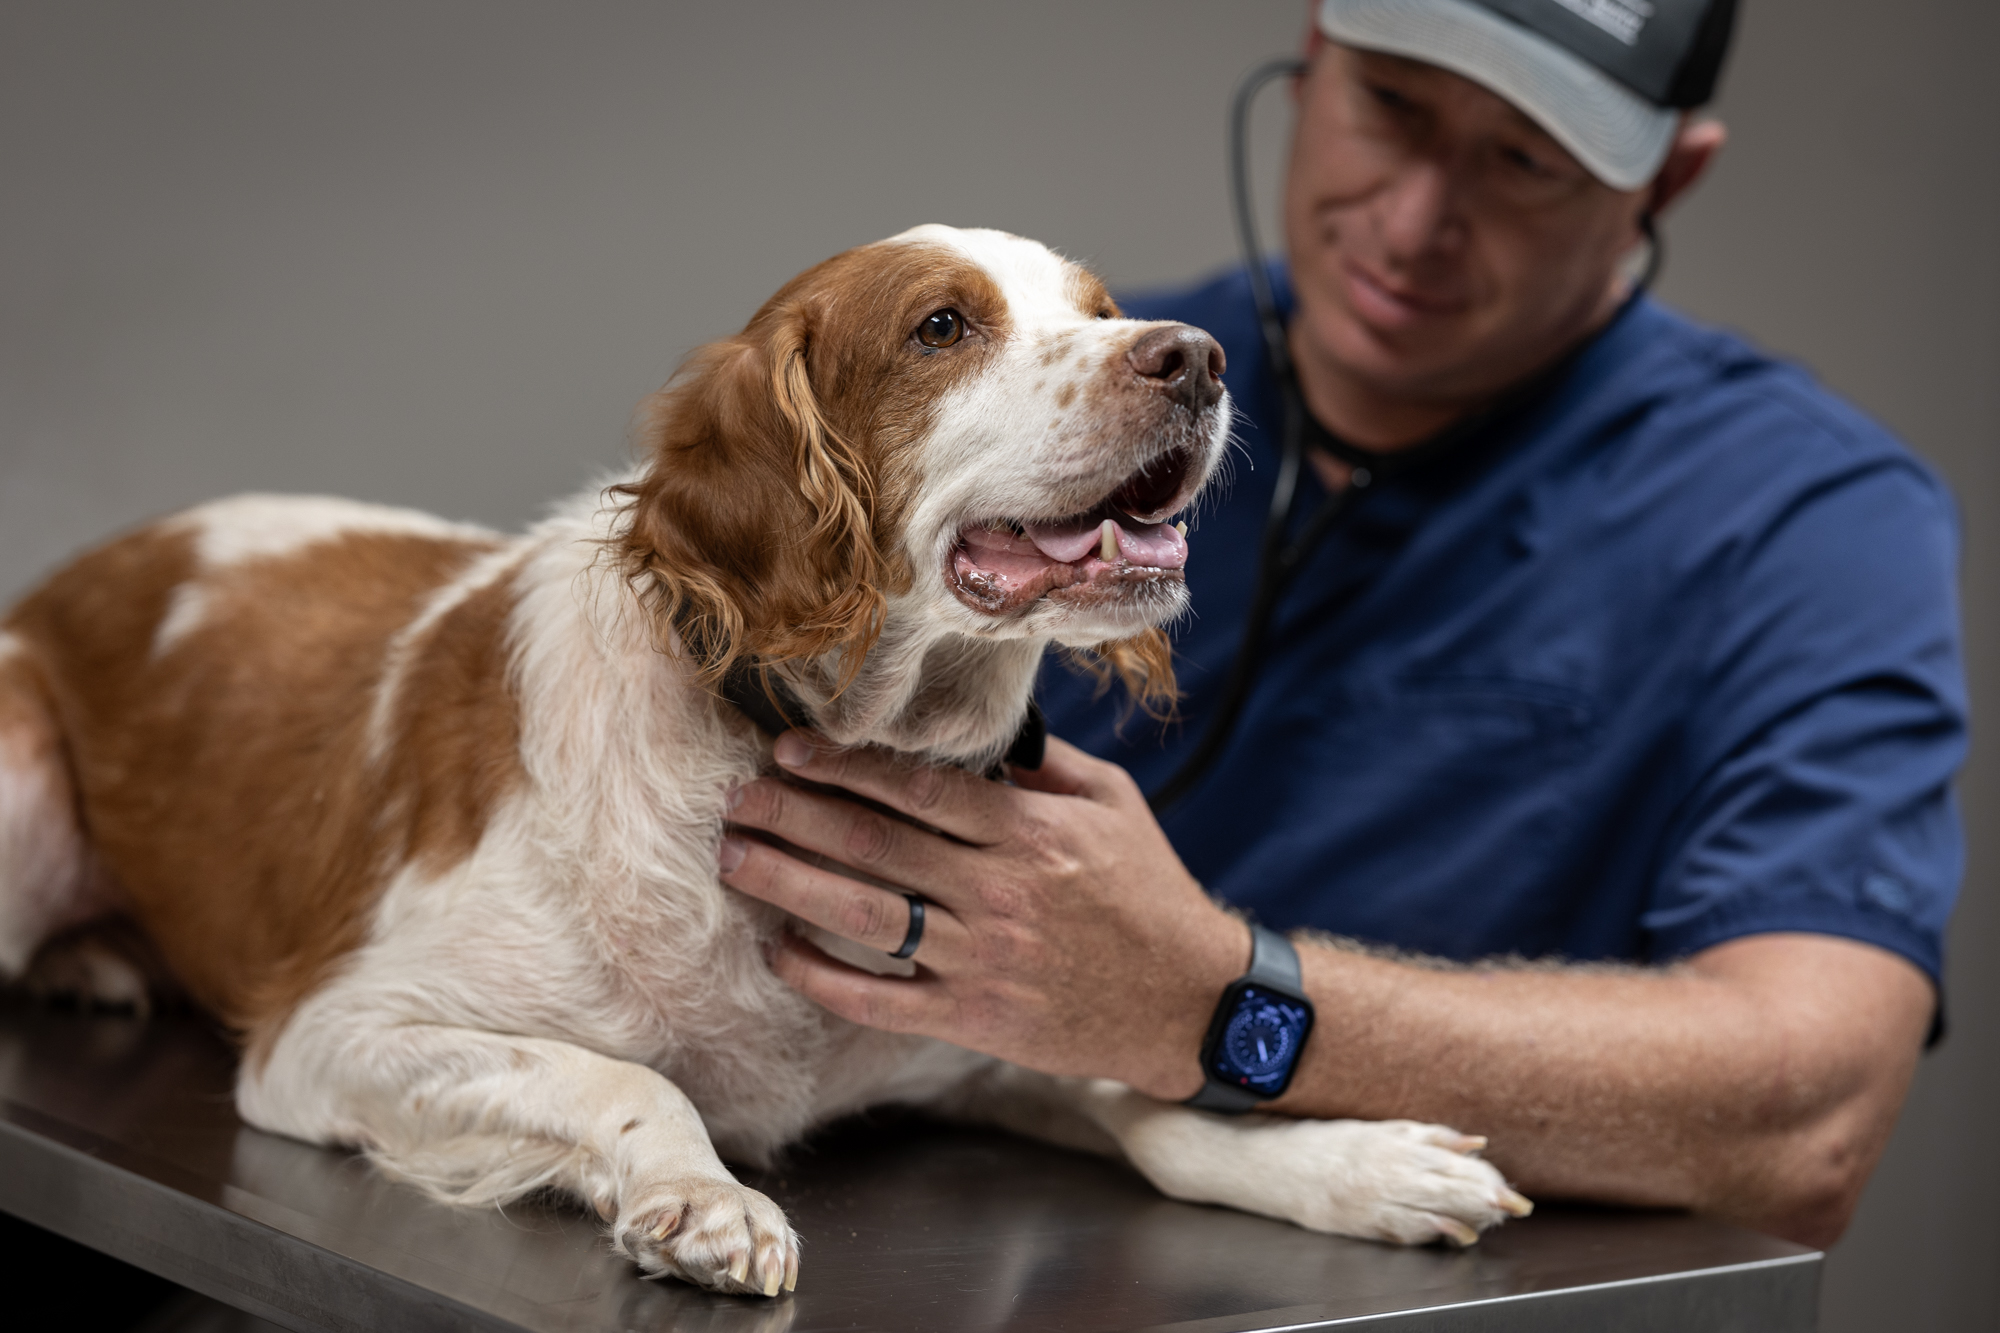 A Brittany dog laying on a table gets evaluated by a doctor wearing a stethoscope and blue scrubs.